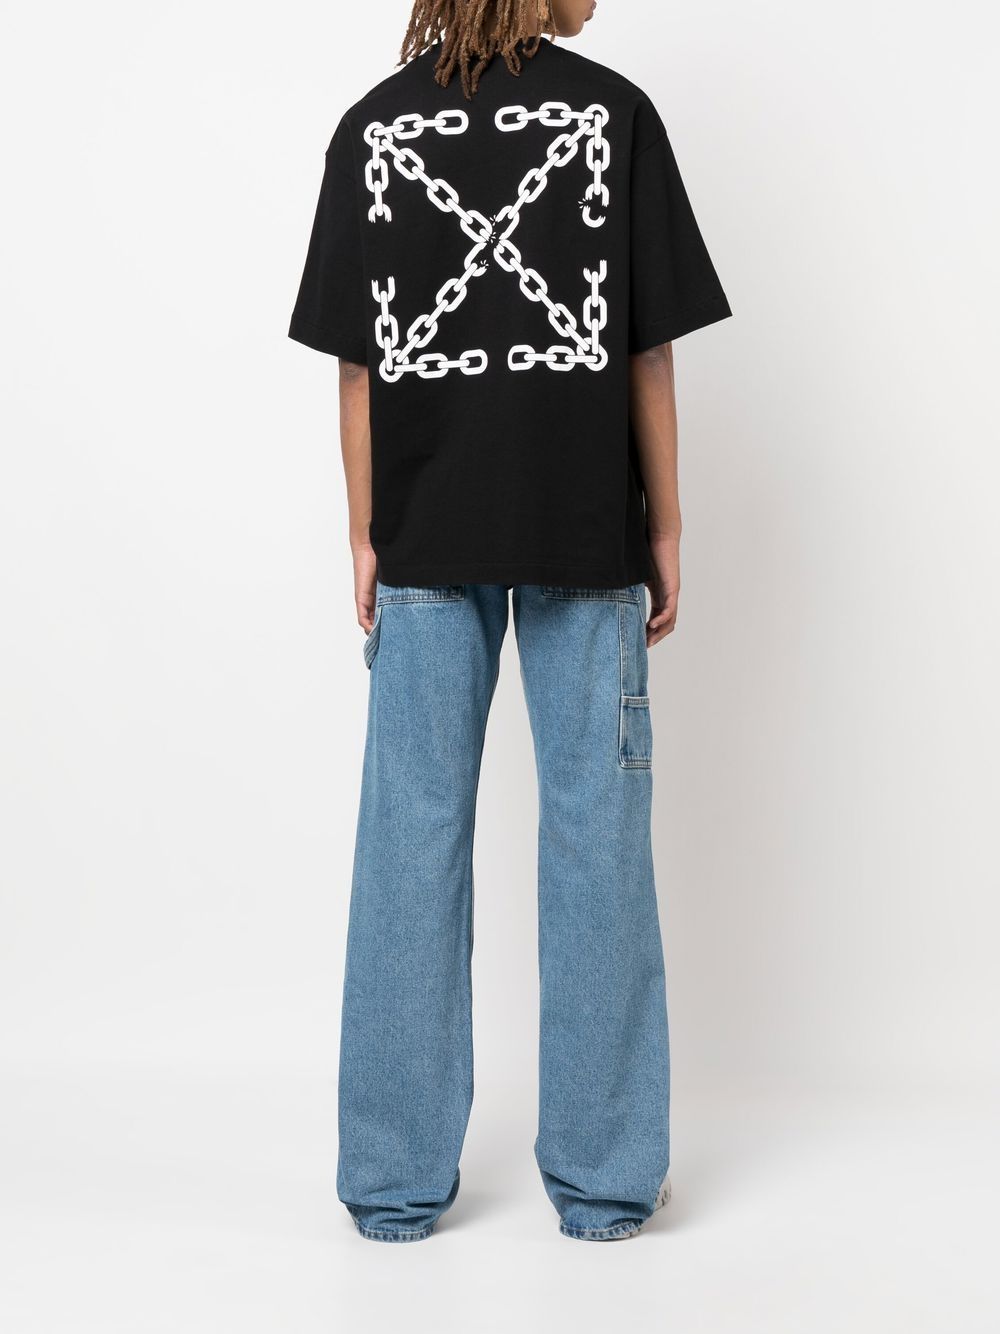 OFF-WHITE Black cotton T-shirt with